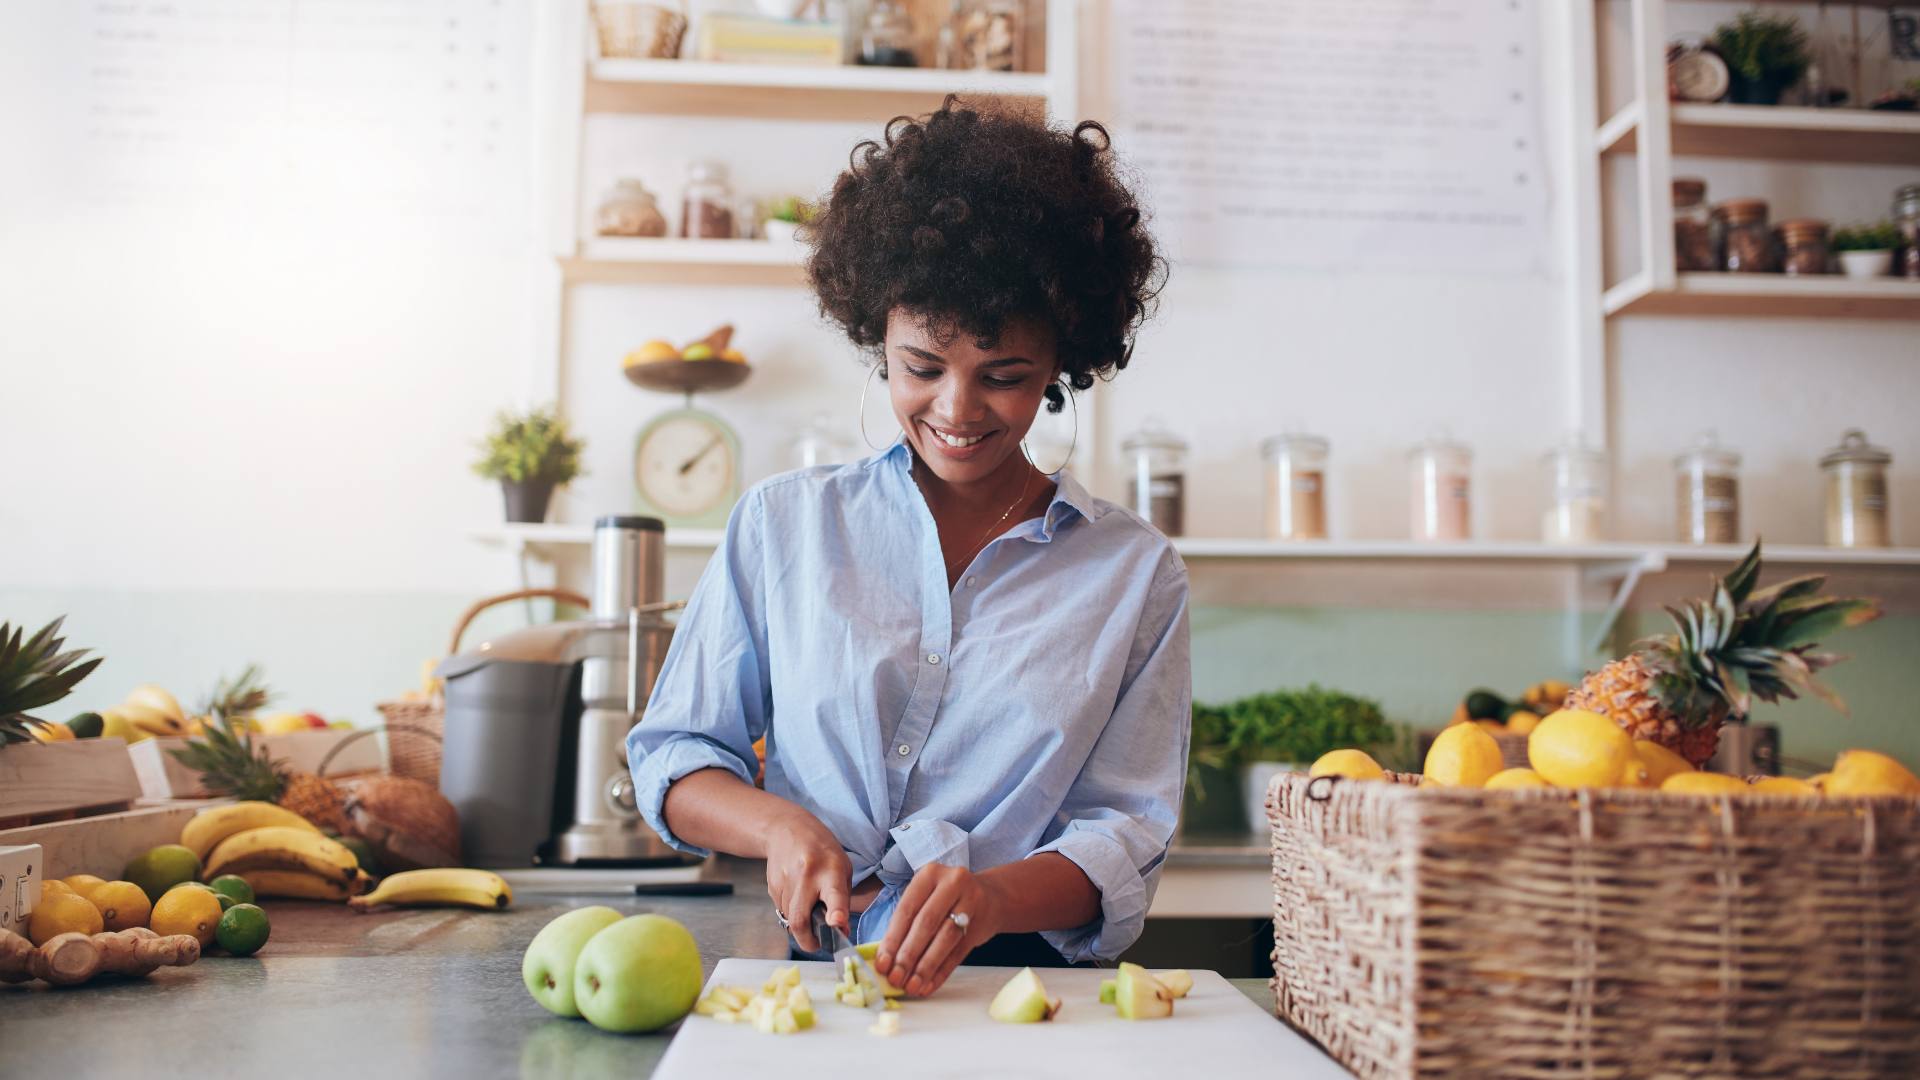 woman chopping fruits and vegetables on counter smiling